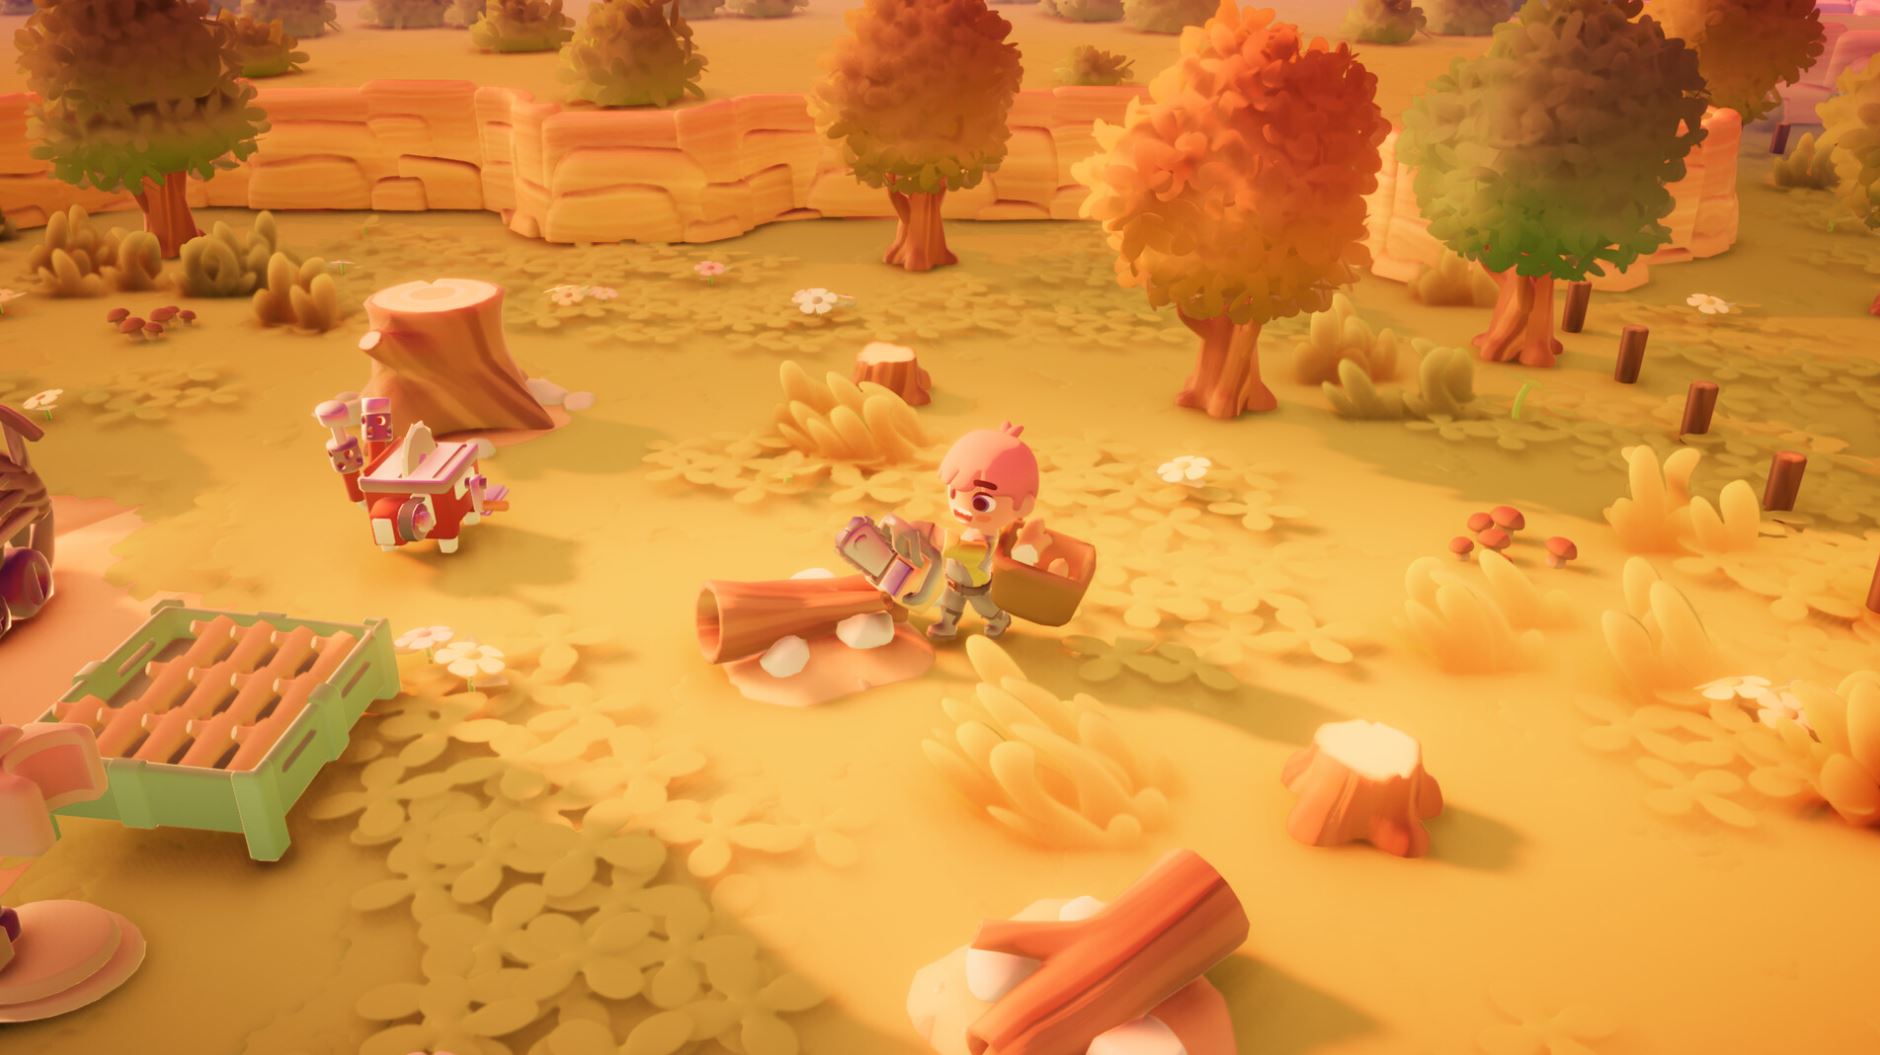 The player character gathers wood in Go-Go Town